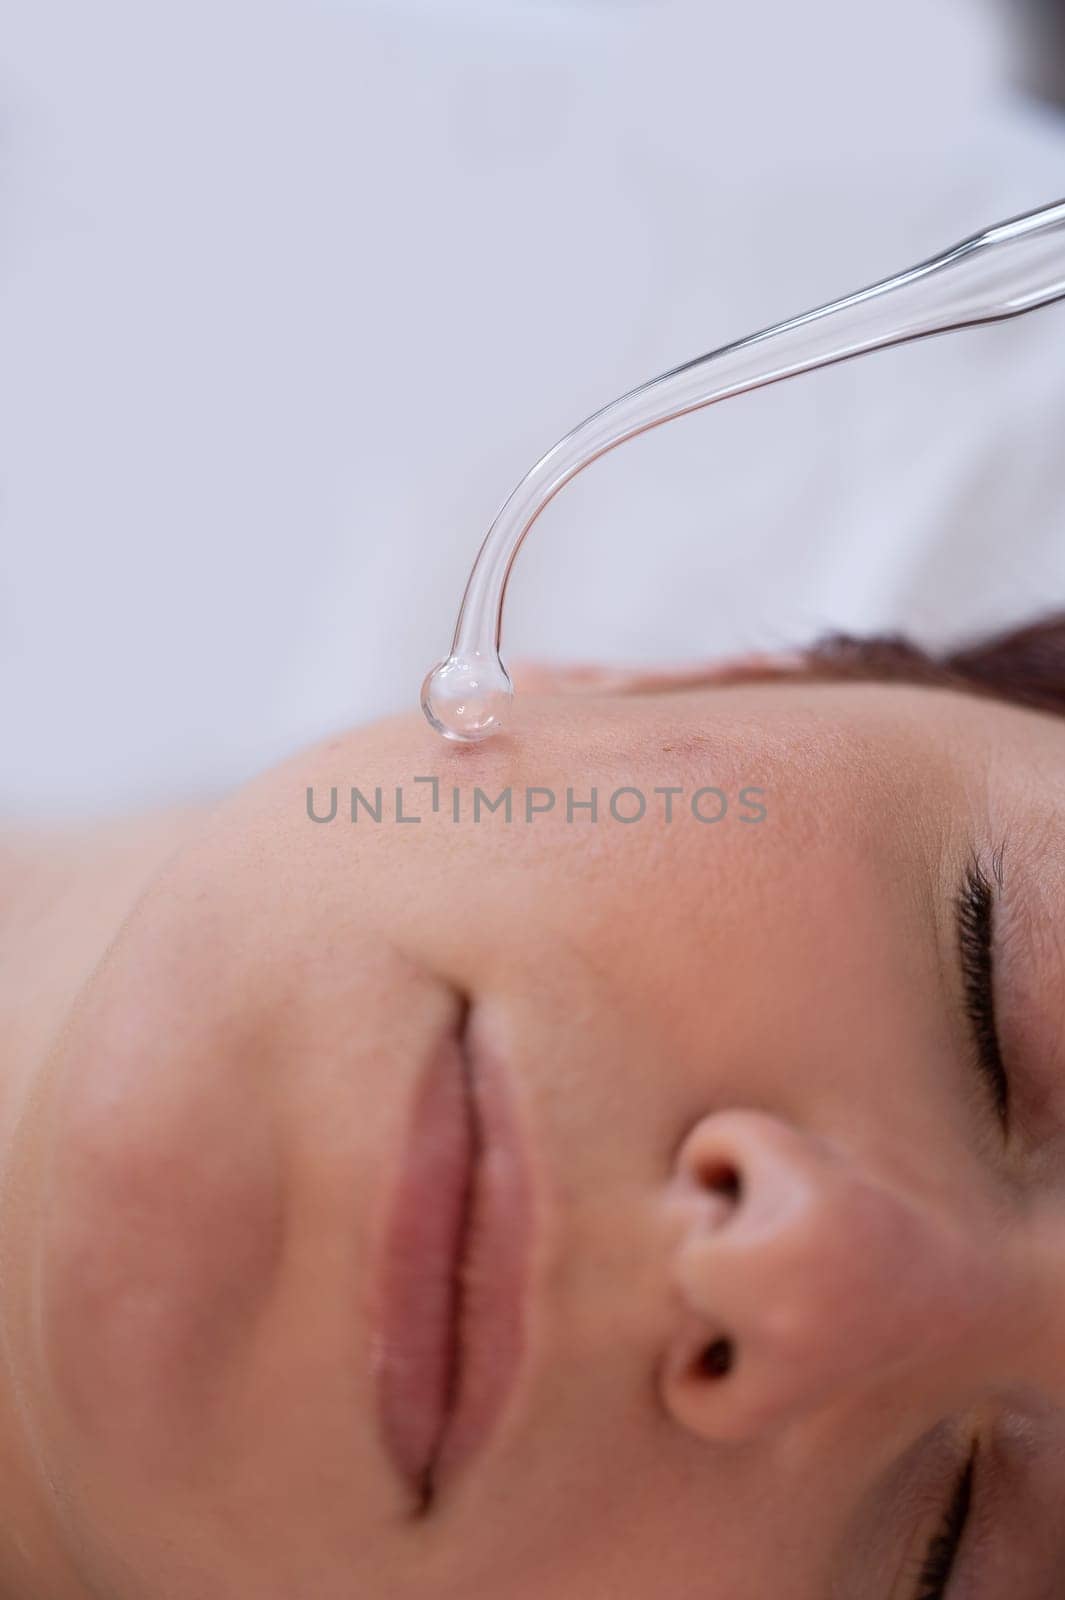 The doctor uses the darsonval apparatus against acne on the face of a female patient